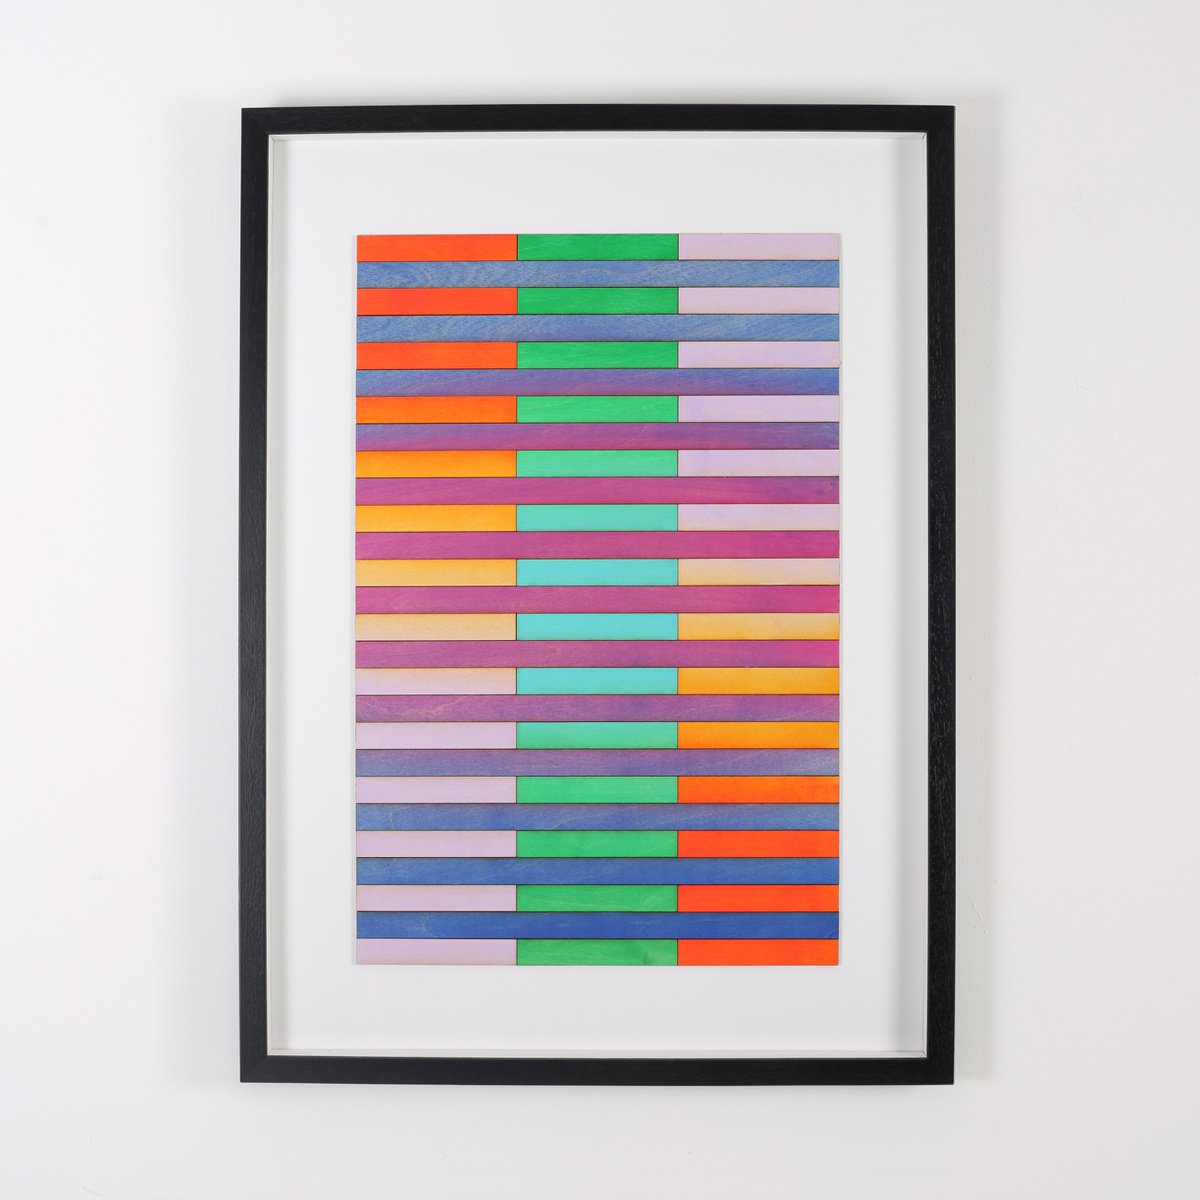 Three Panel Abstract Geometric Gradient Painting Number SIX by Amelia Coward